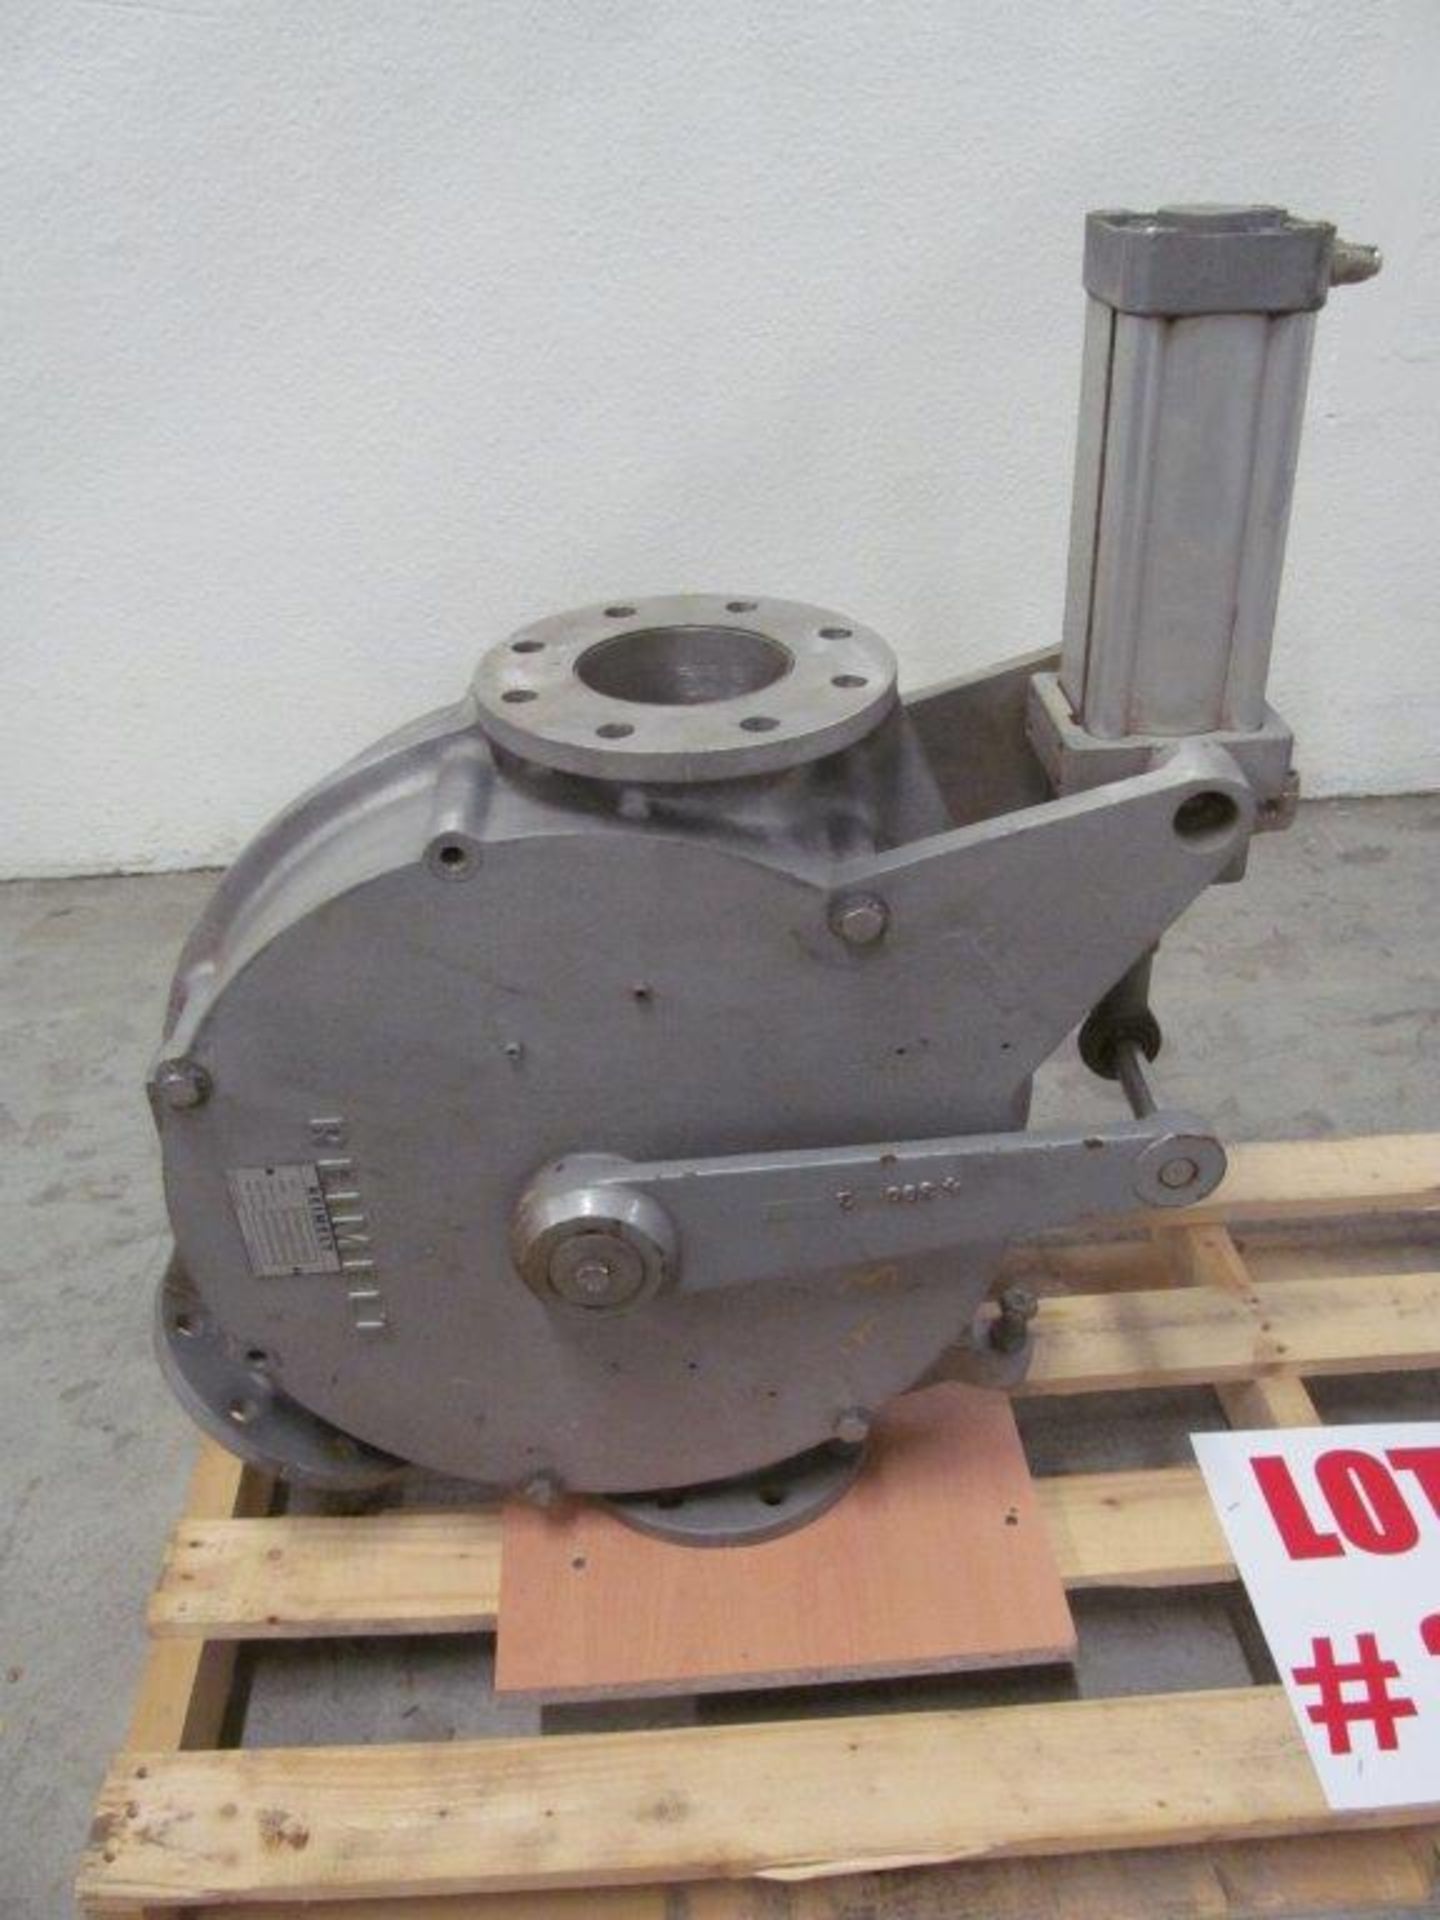 REIMELT (GERMANY) DIVERTERS, TYPE ZWV-DN110P6, 4-1/2" OPENING, ALUMINUM - Image 2 of 5